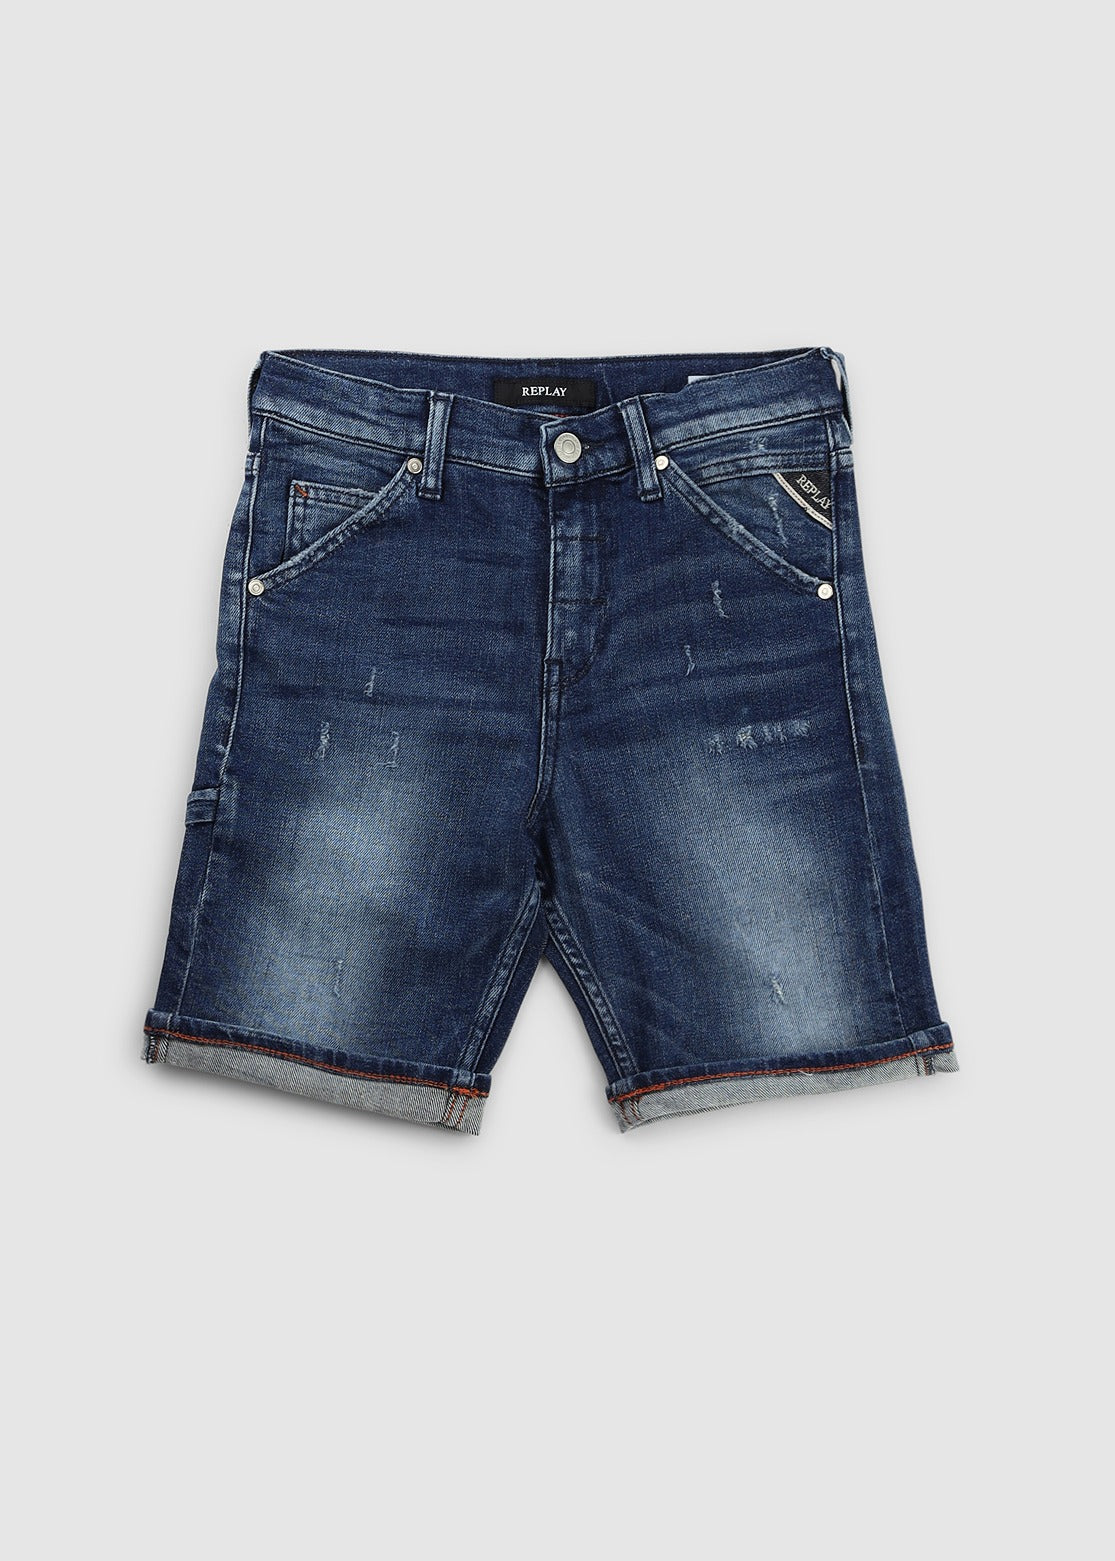 Image of Replay Kids Gekow Japanese Denim Shorts In Blue